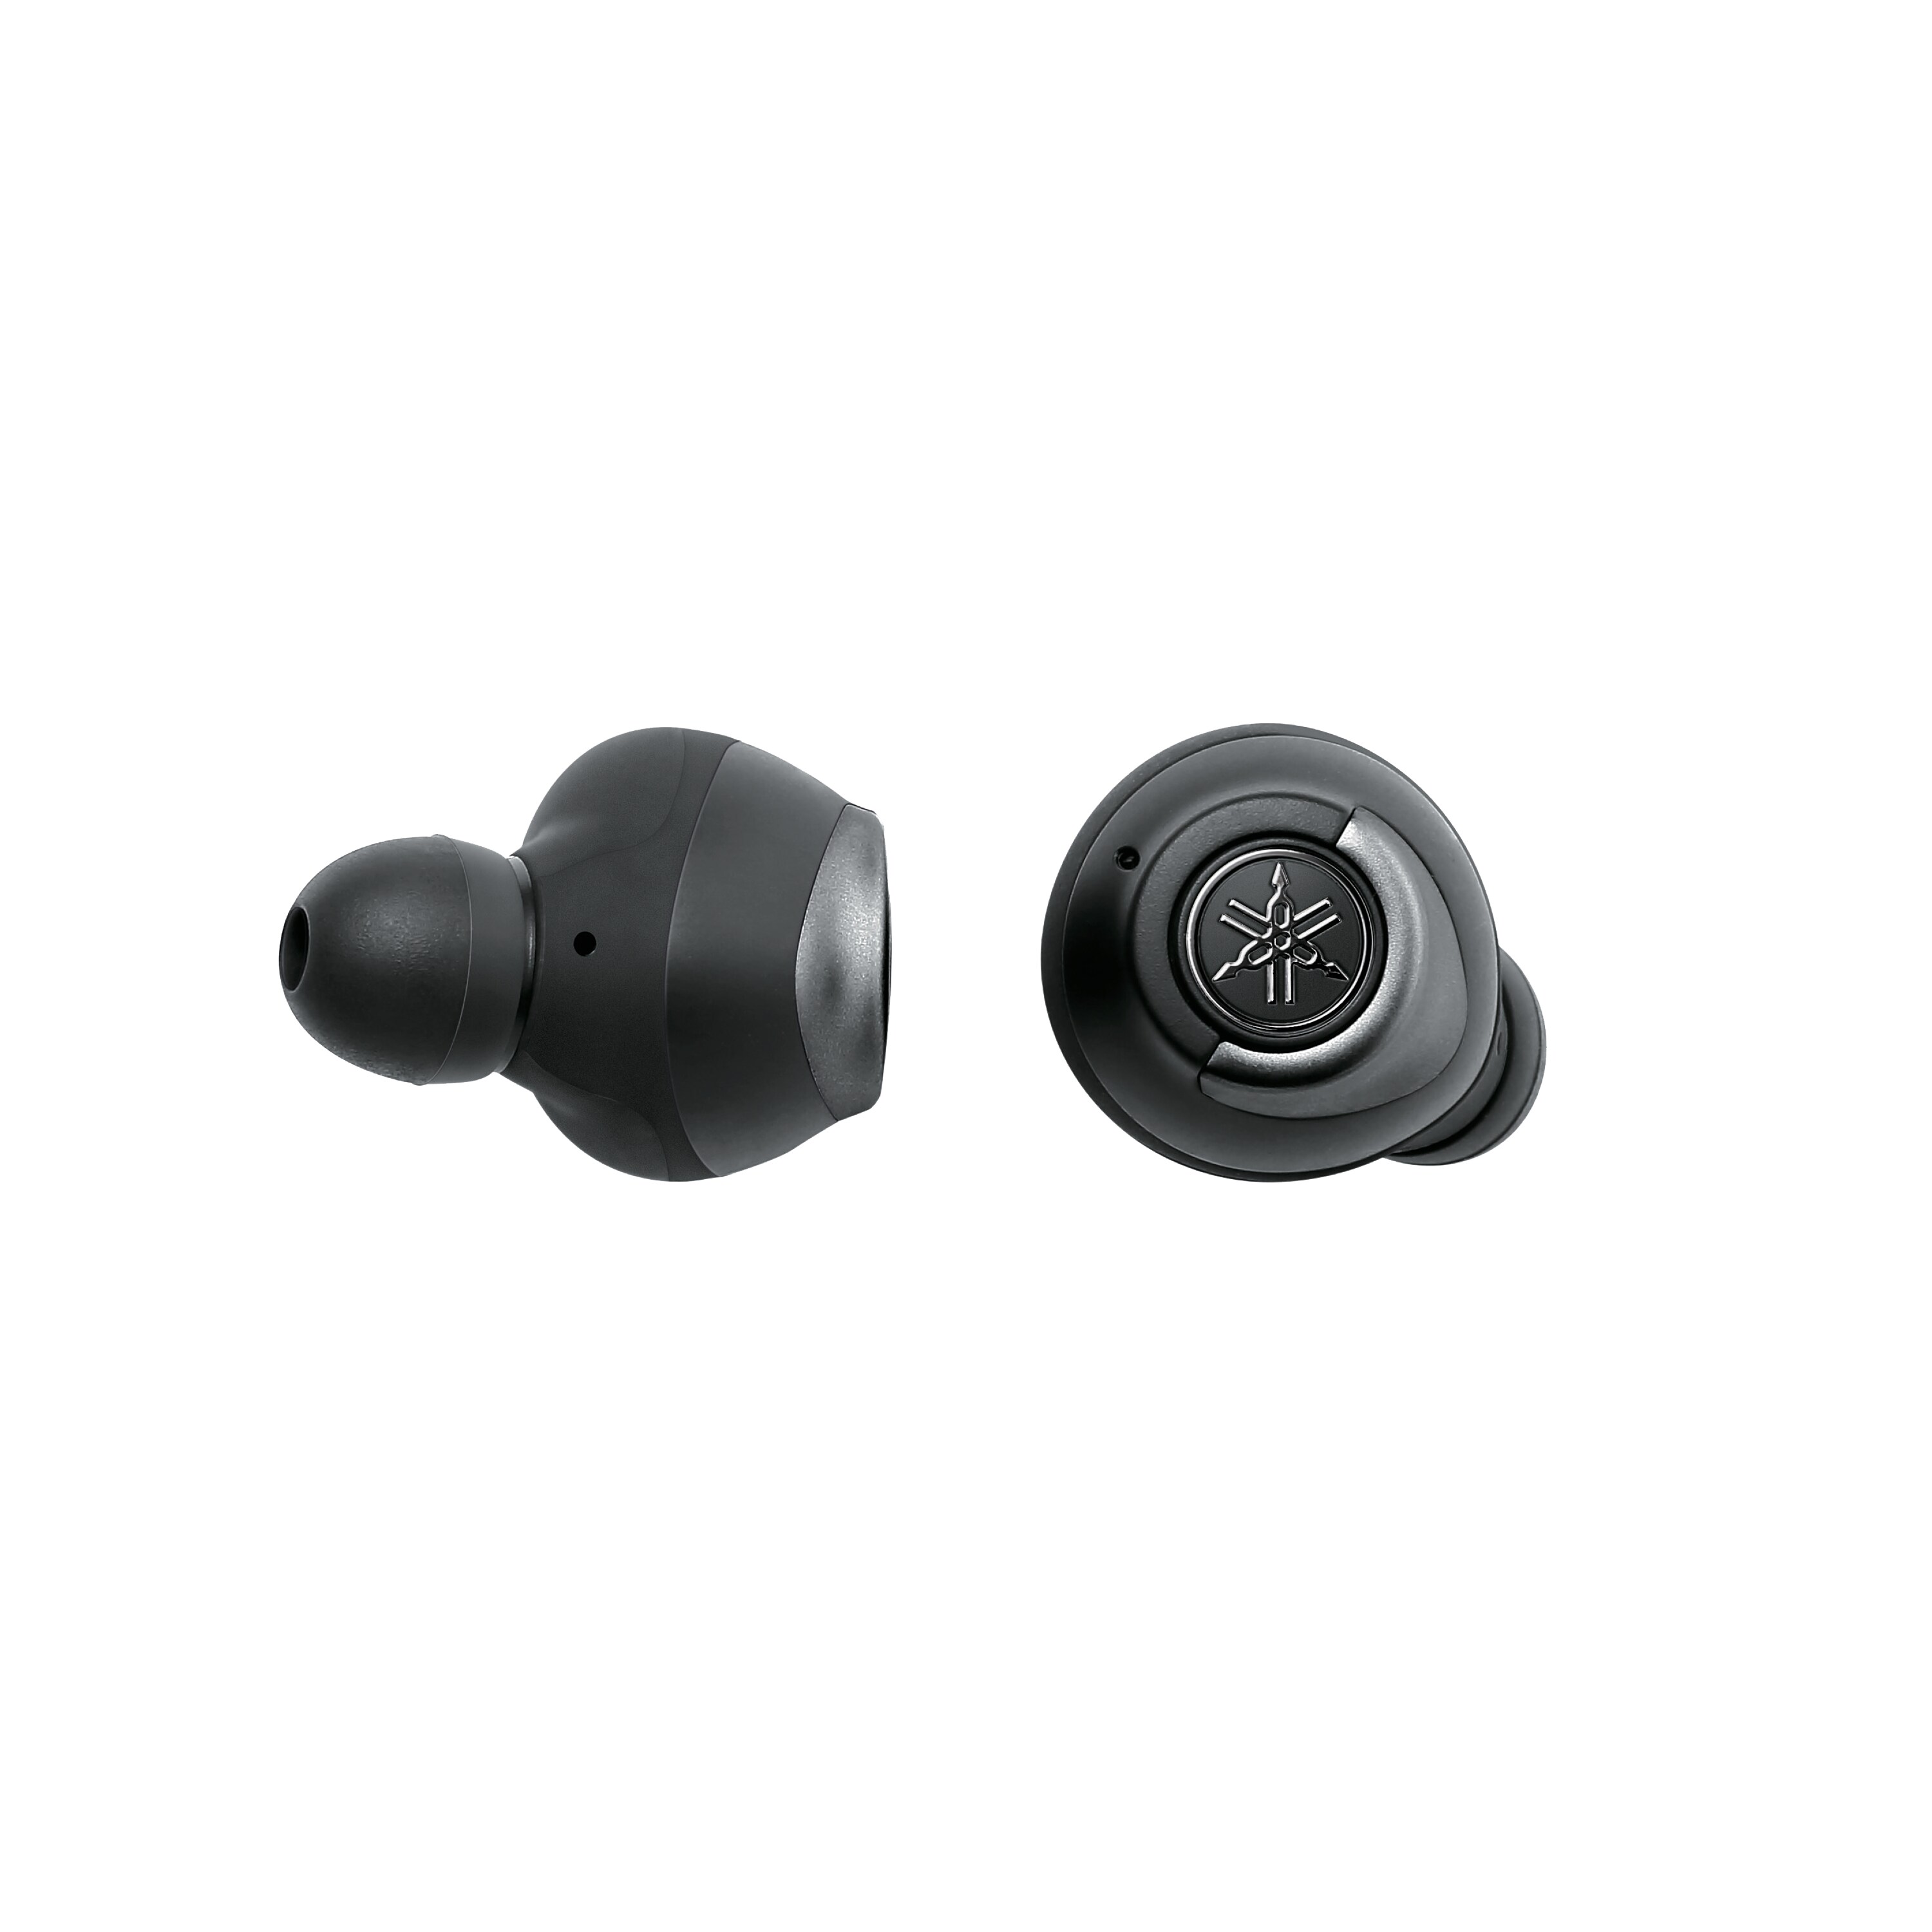 Specs: TW-E7A True Wireless Noise-Cancelling Earbuds - Yamaha